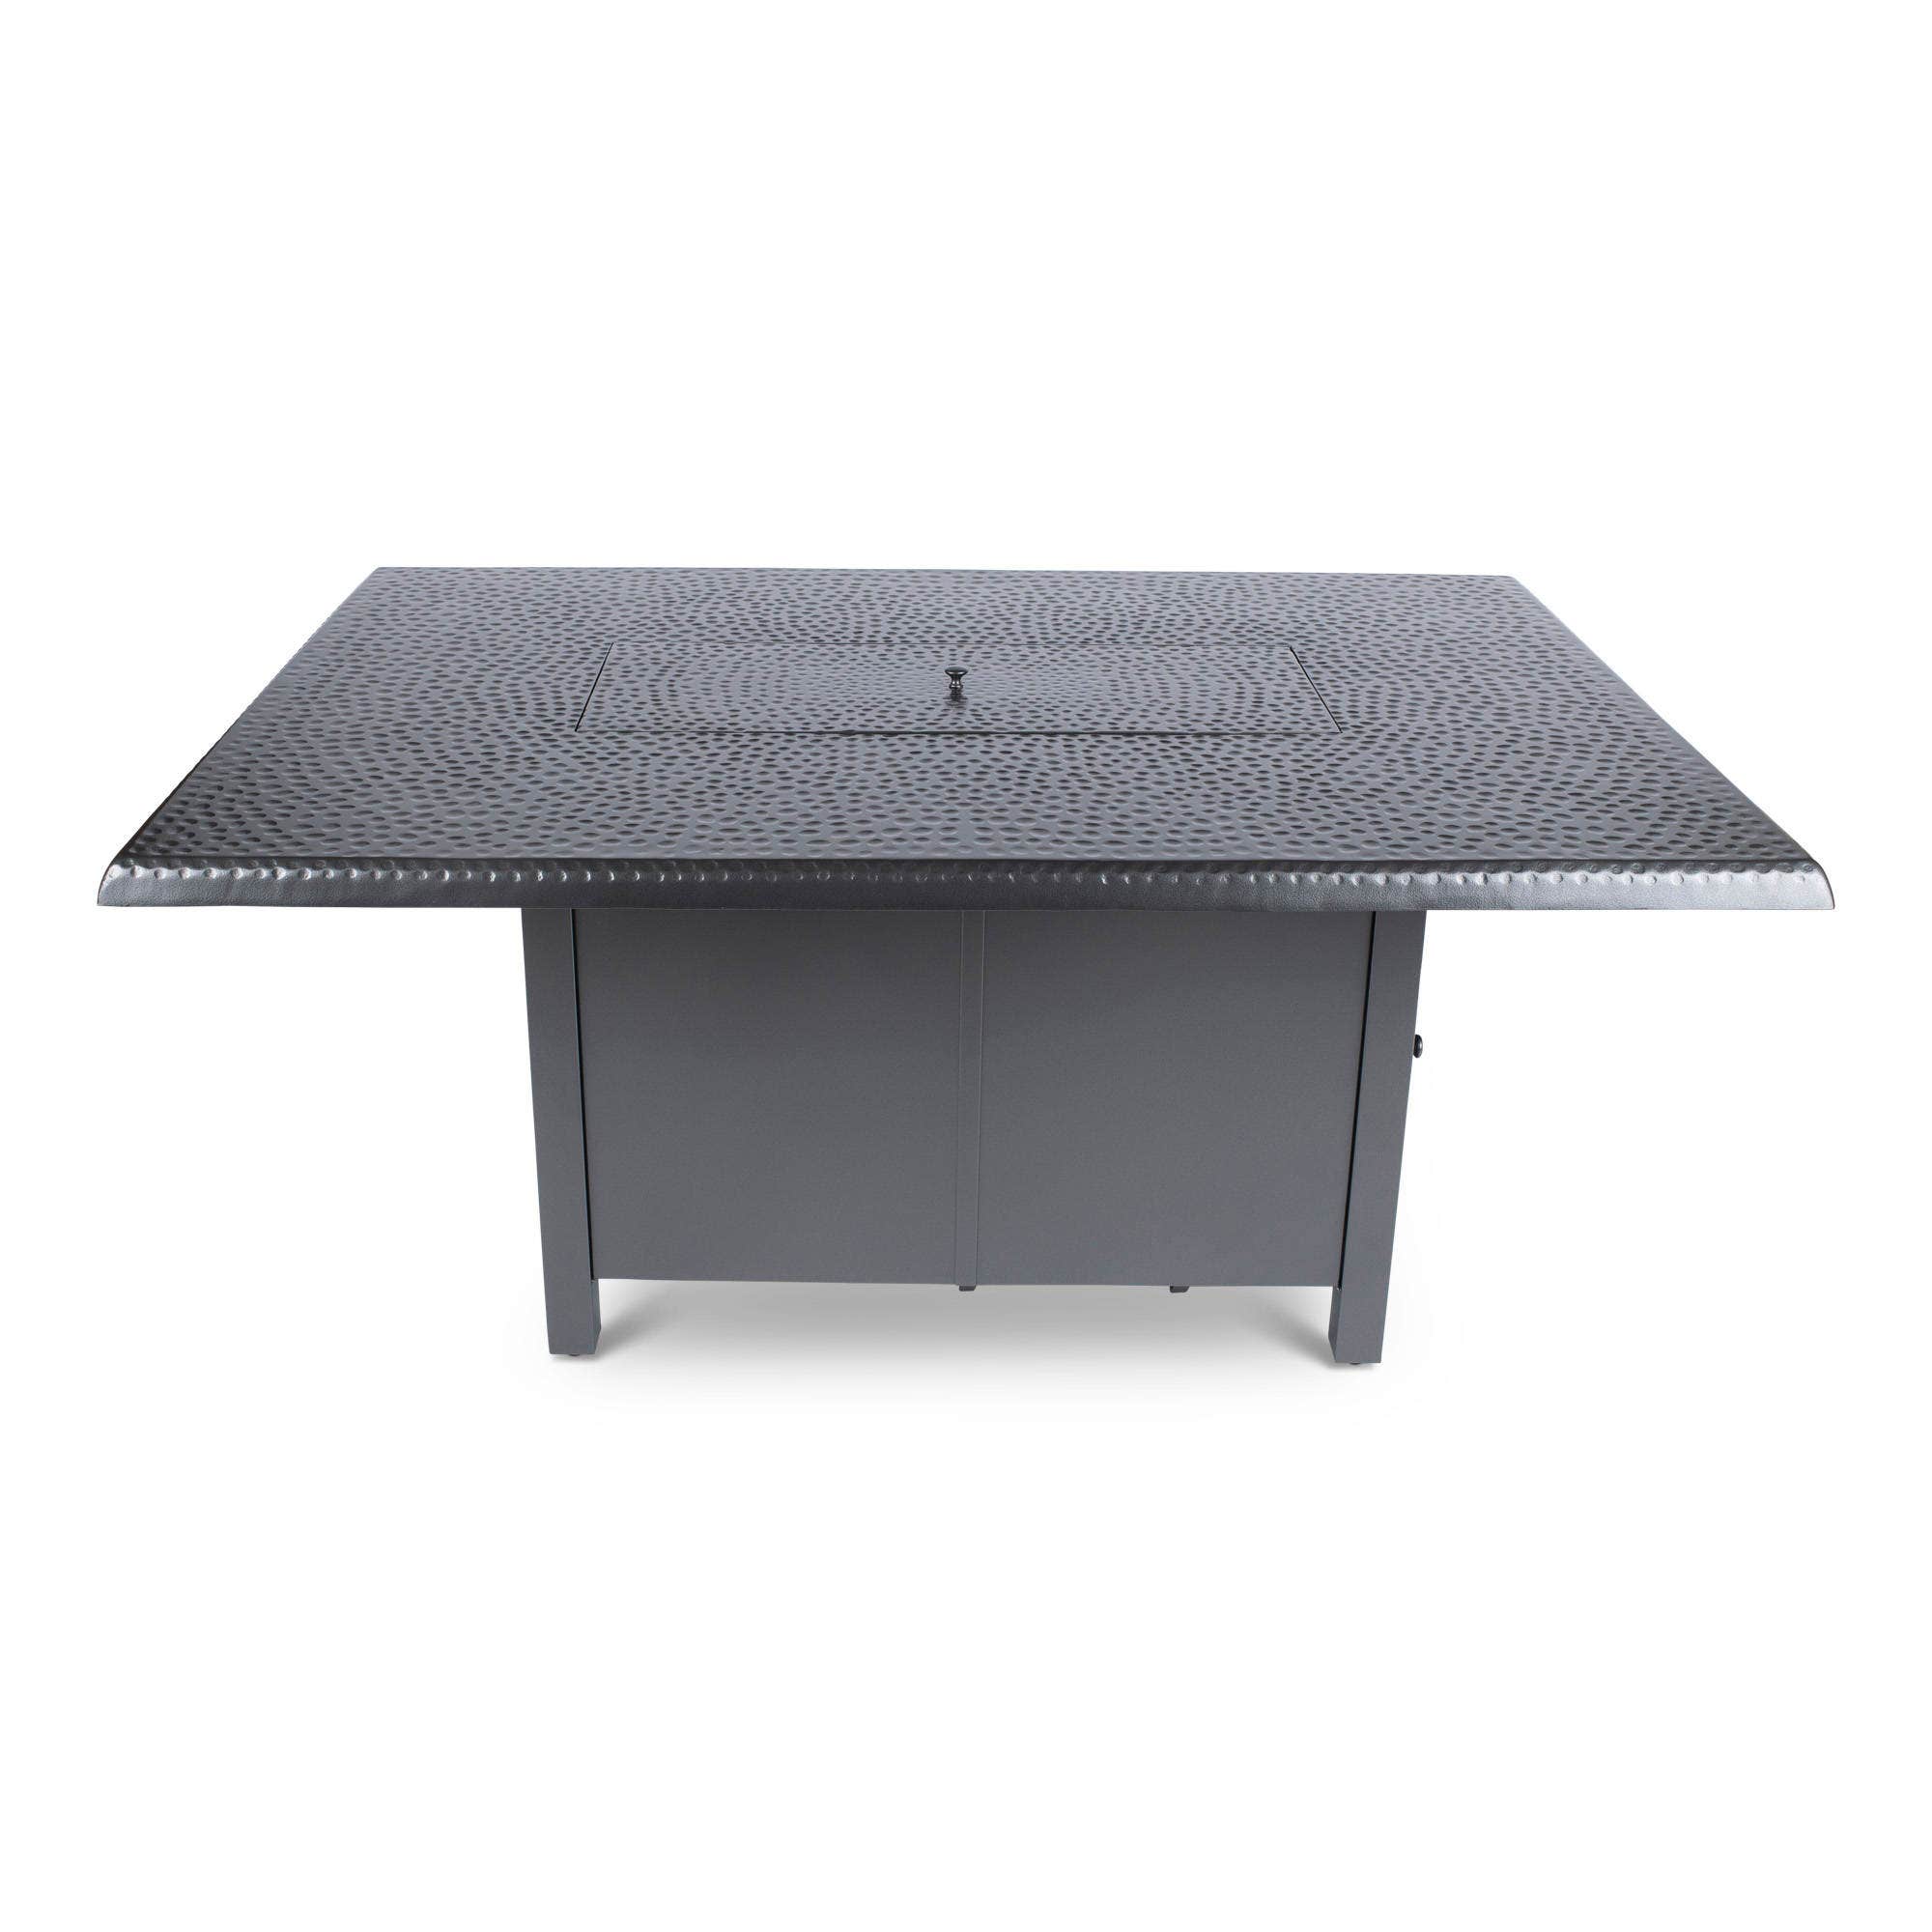 Woodard 42 inch x 60 inch Rectangular Chat Height Fire Table with Hammered Top in Pewter Finish Fireplaces 12037569